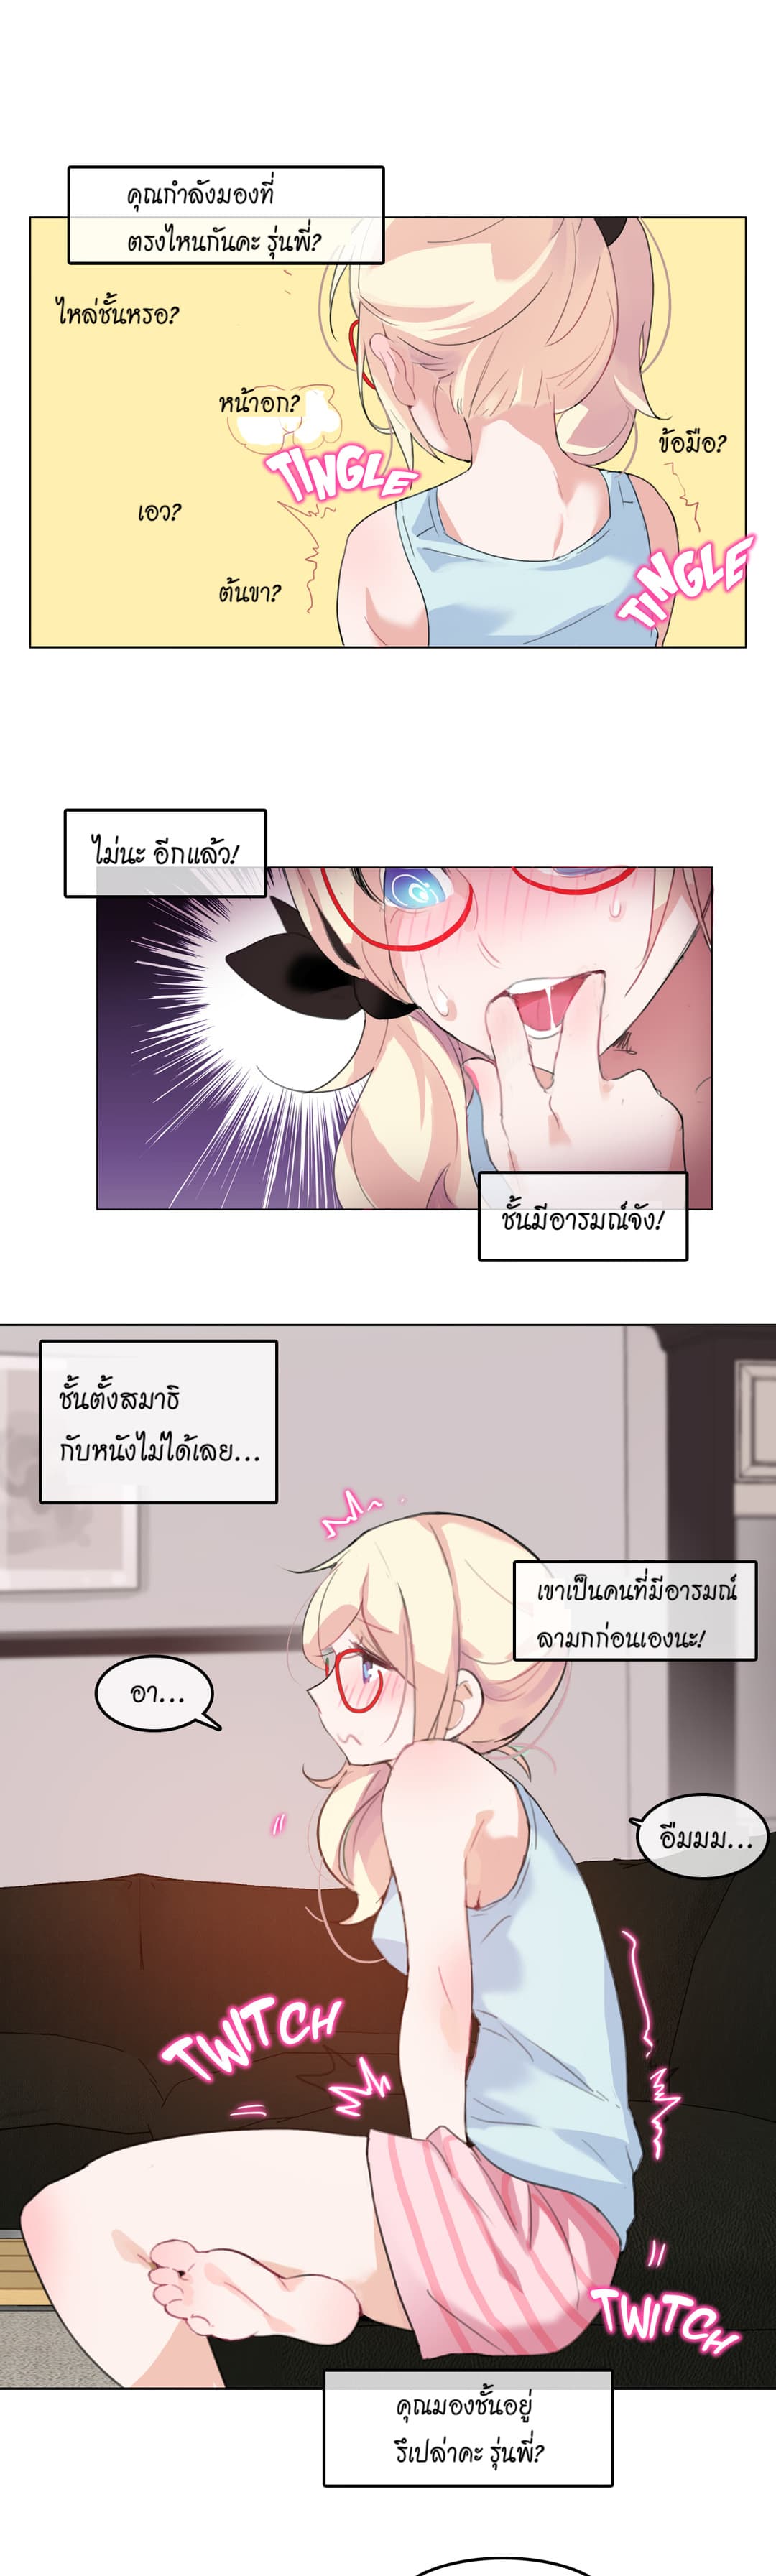 A Pervert's Daily Life 4-4